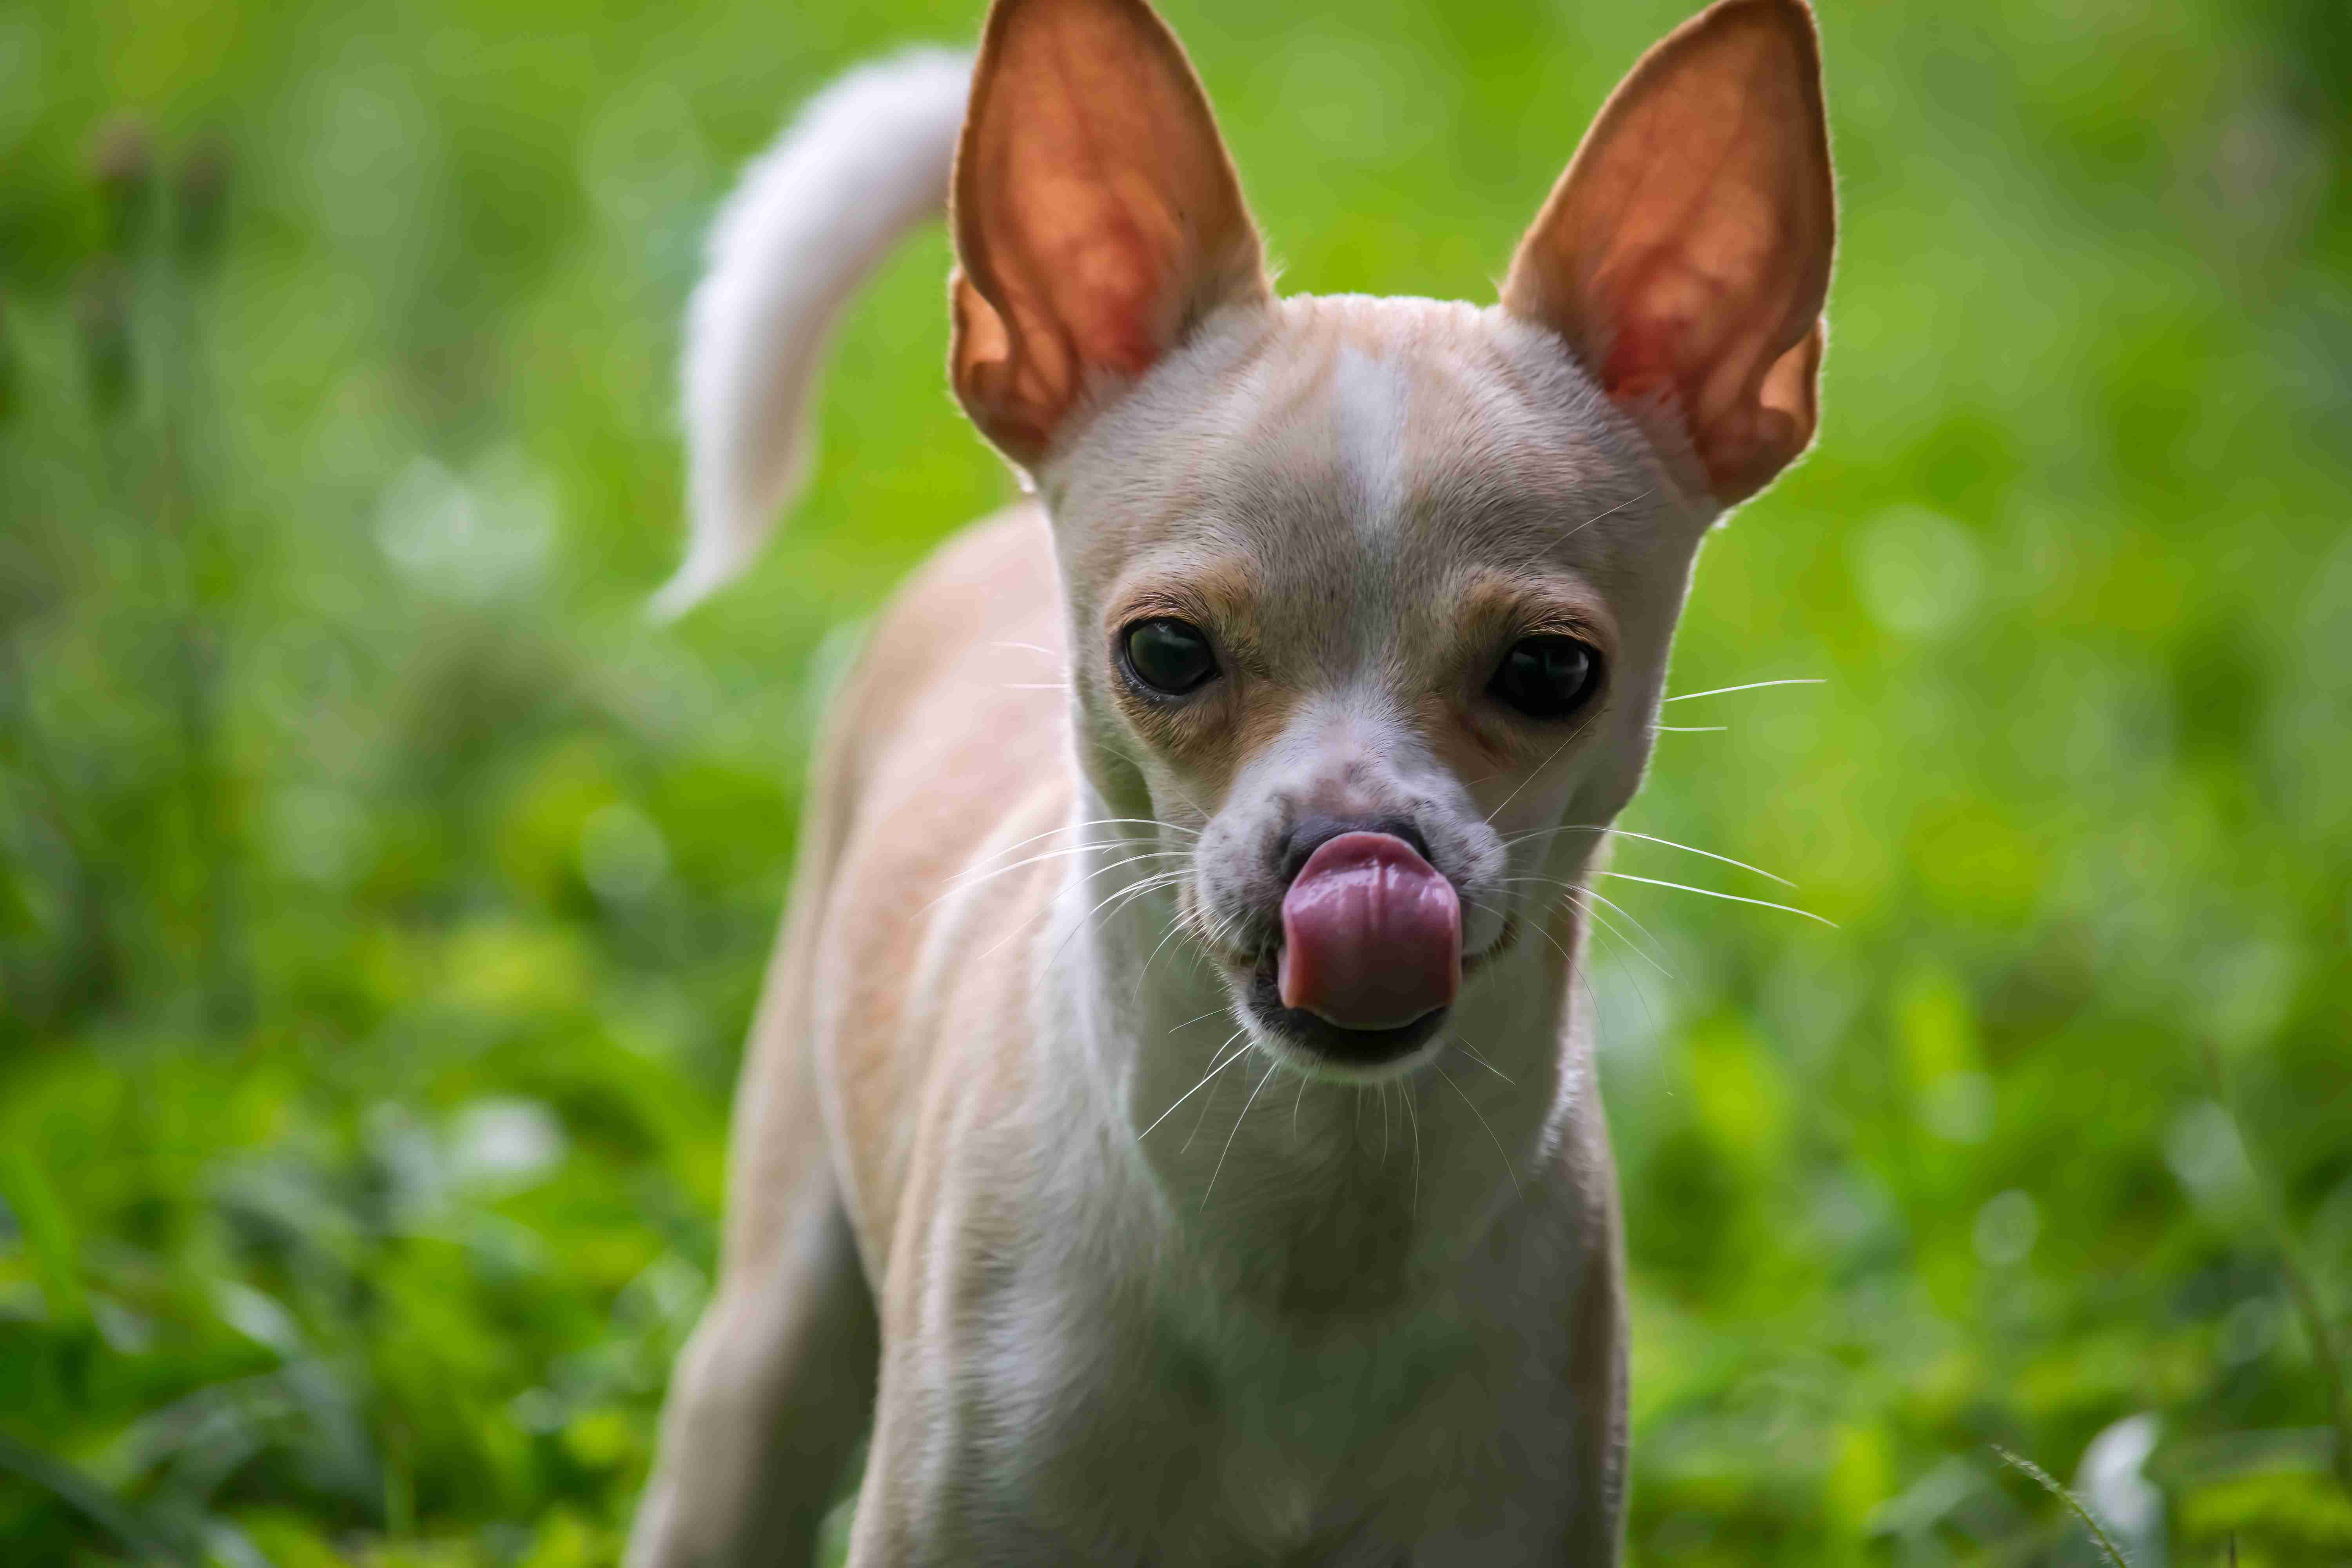 How can you safely introduce a Chihuahua with anger issues to new environments or experiences?